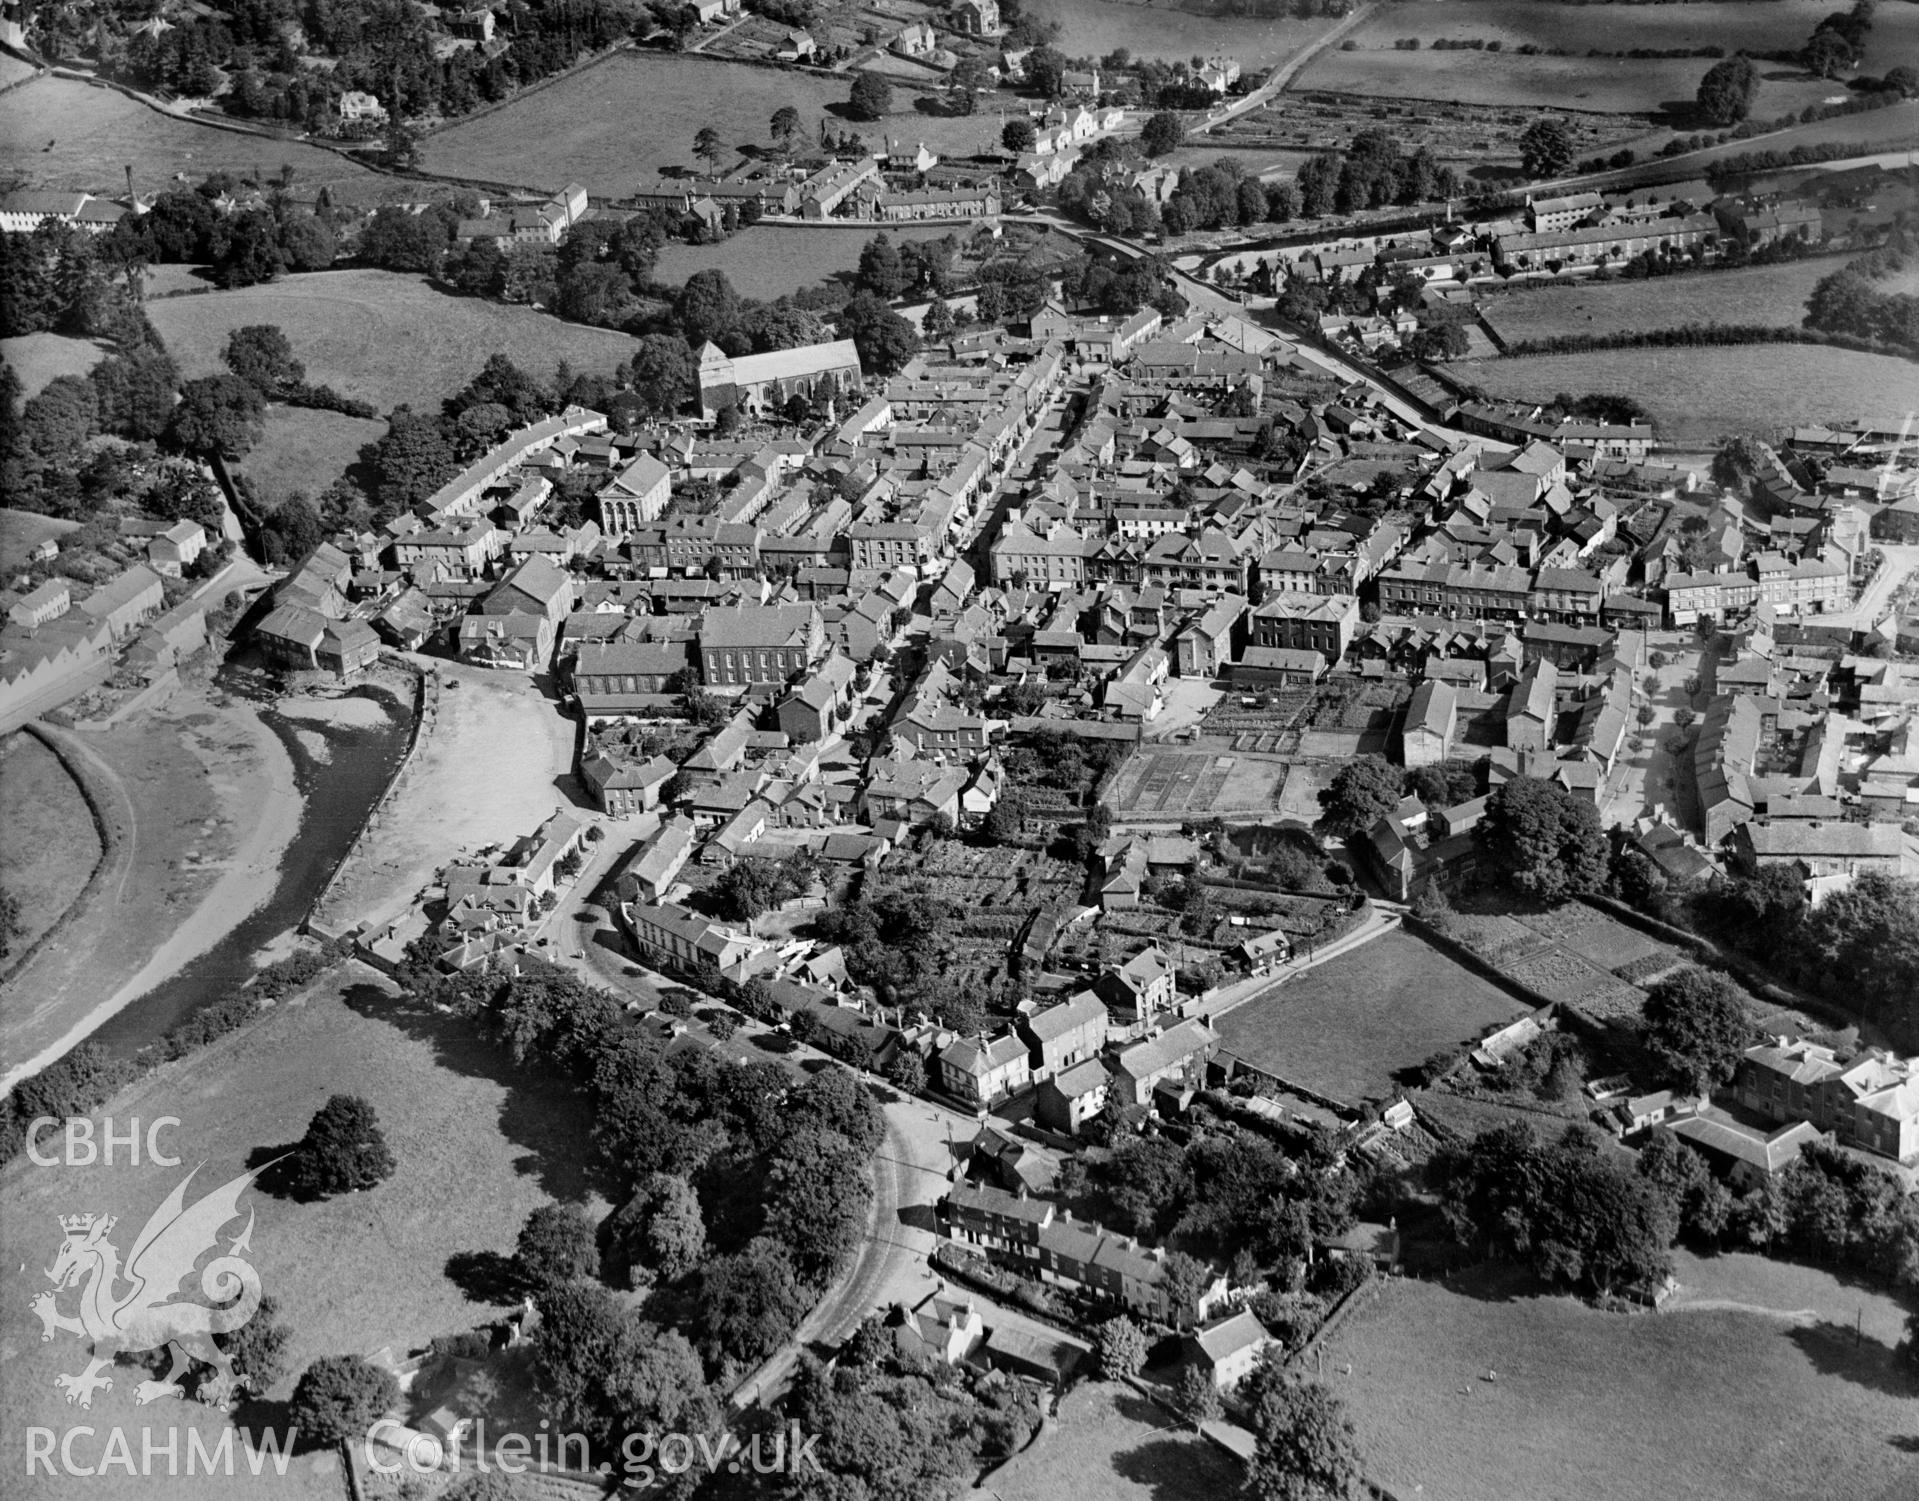 General view of Llanidloes, oblique aerial view. 5?x4? black and white glass plate negative.